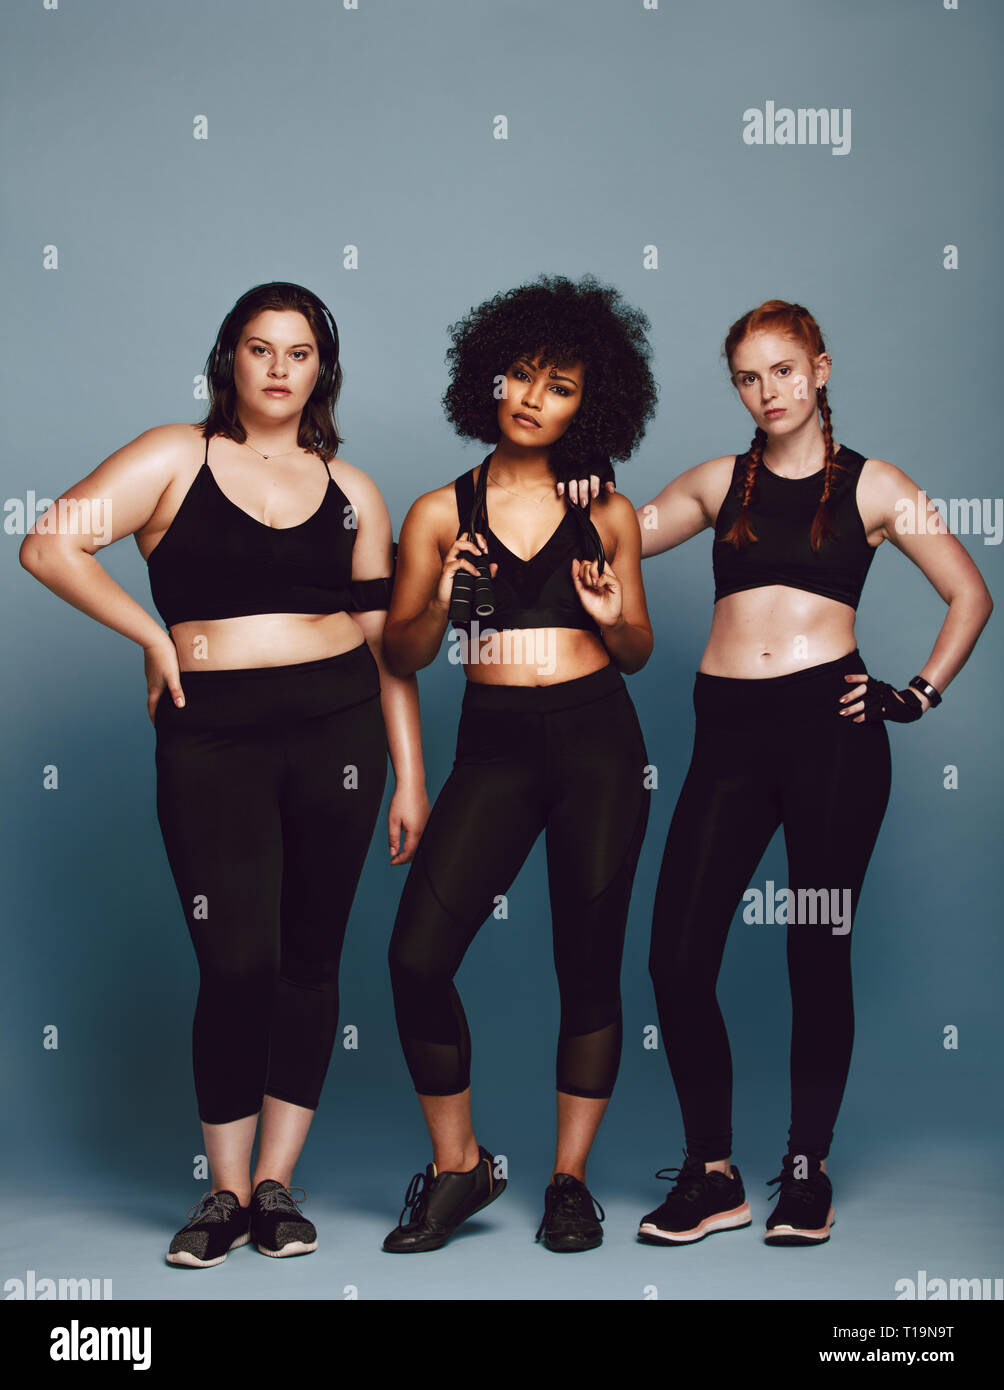 Group of multi-ethnic women in sportswear standing together over grey  background. Three women of different race, figure type and size in fitness  cloth Stock Photo - Alamy